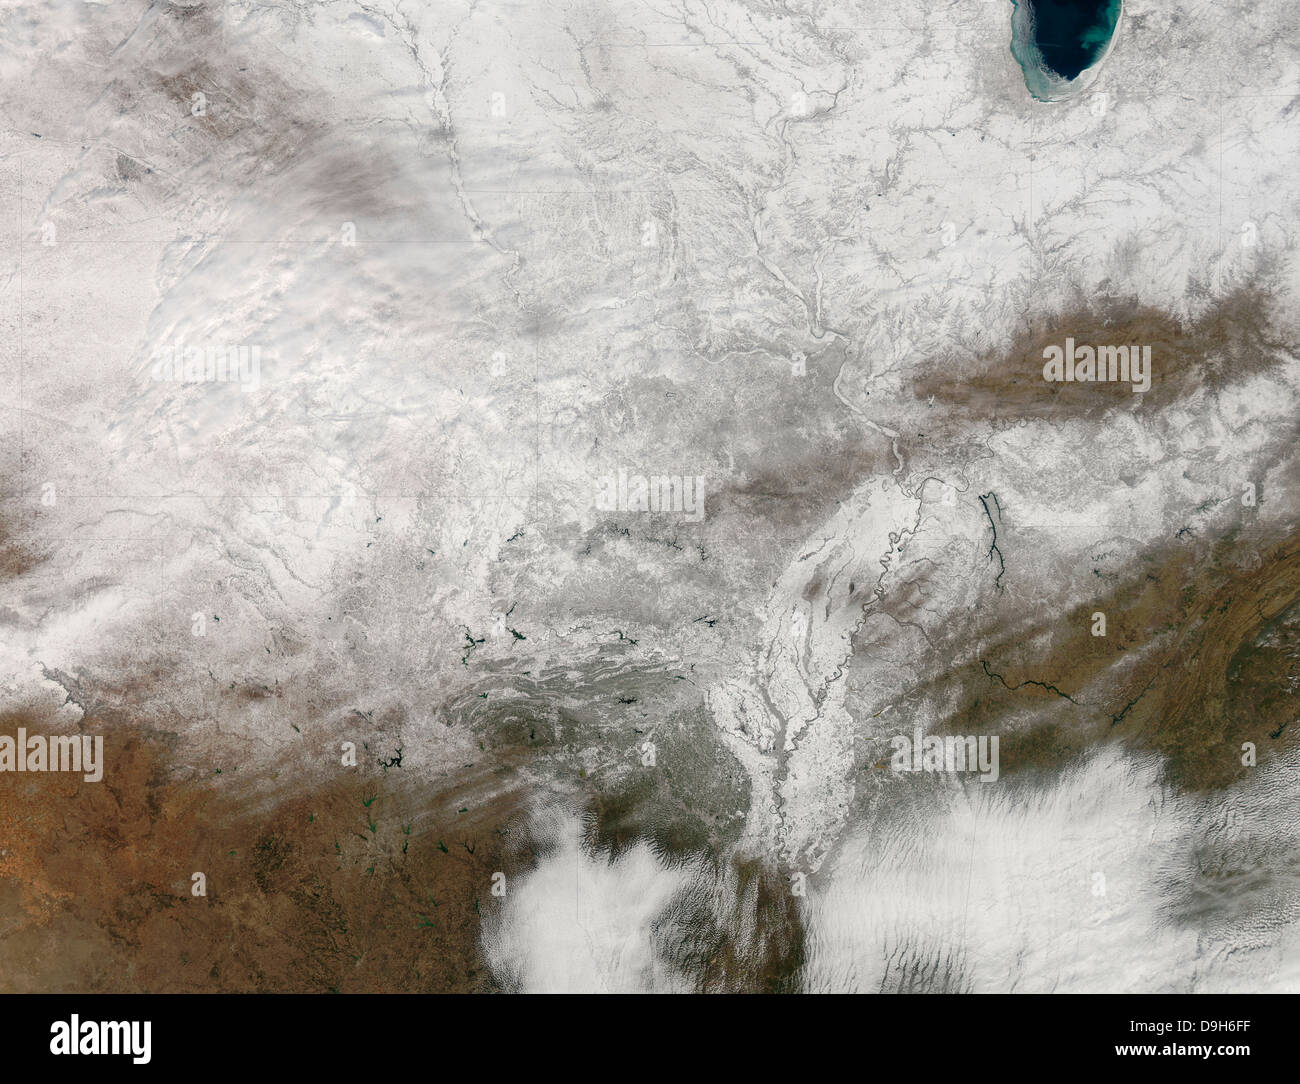 Satellite view of a severe winter storm over the midwestern United States. Stock Photo